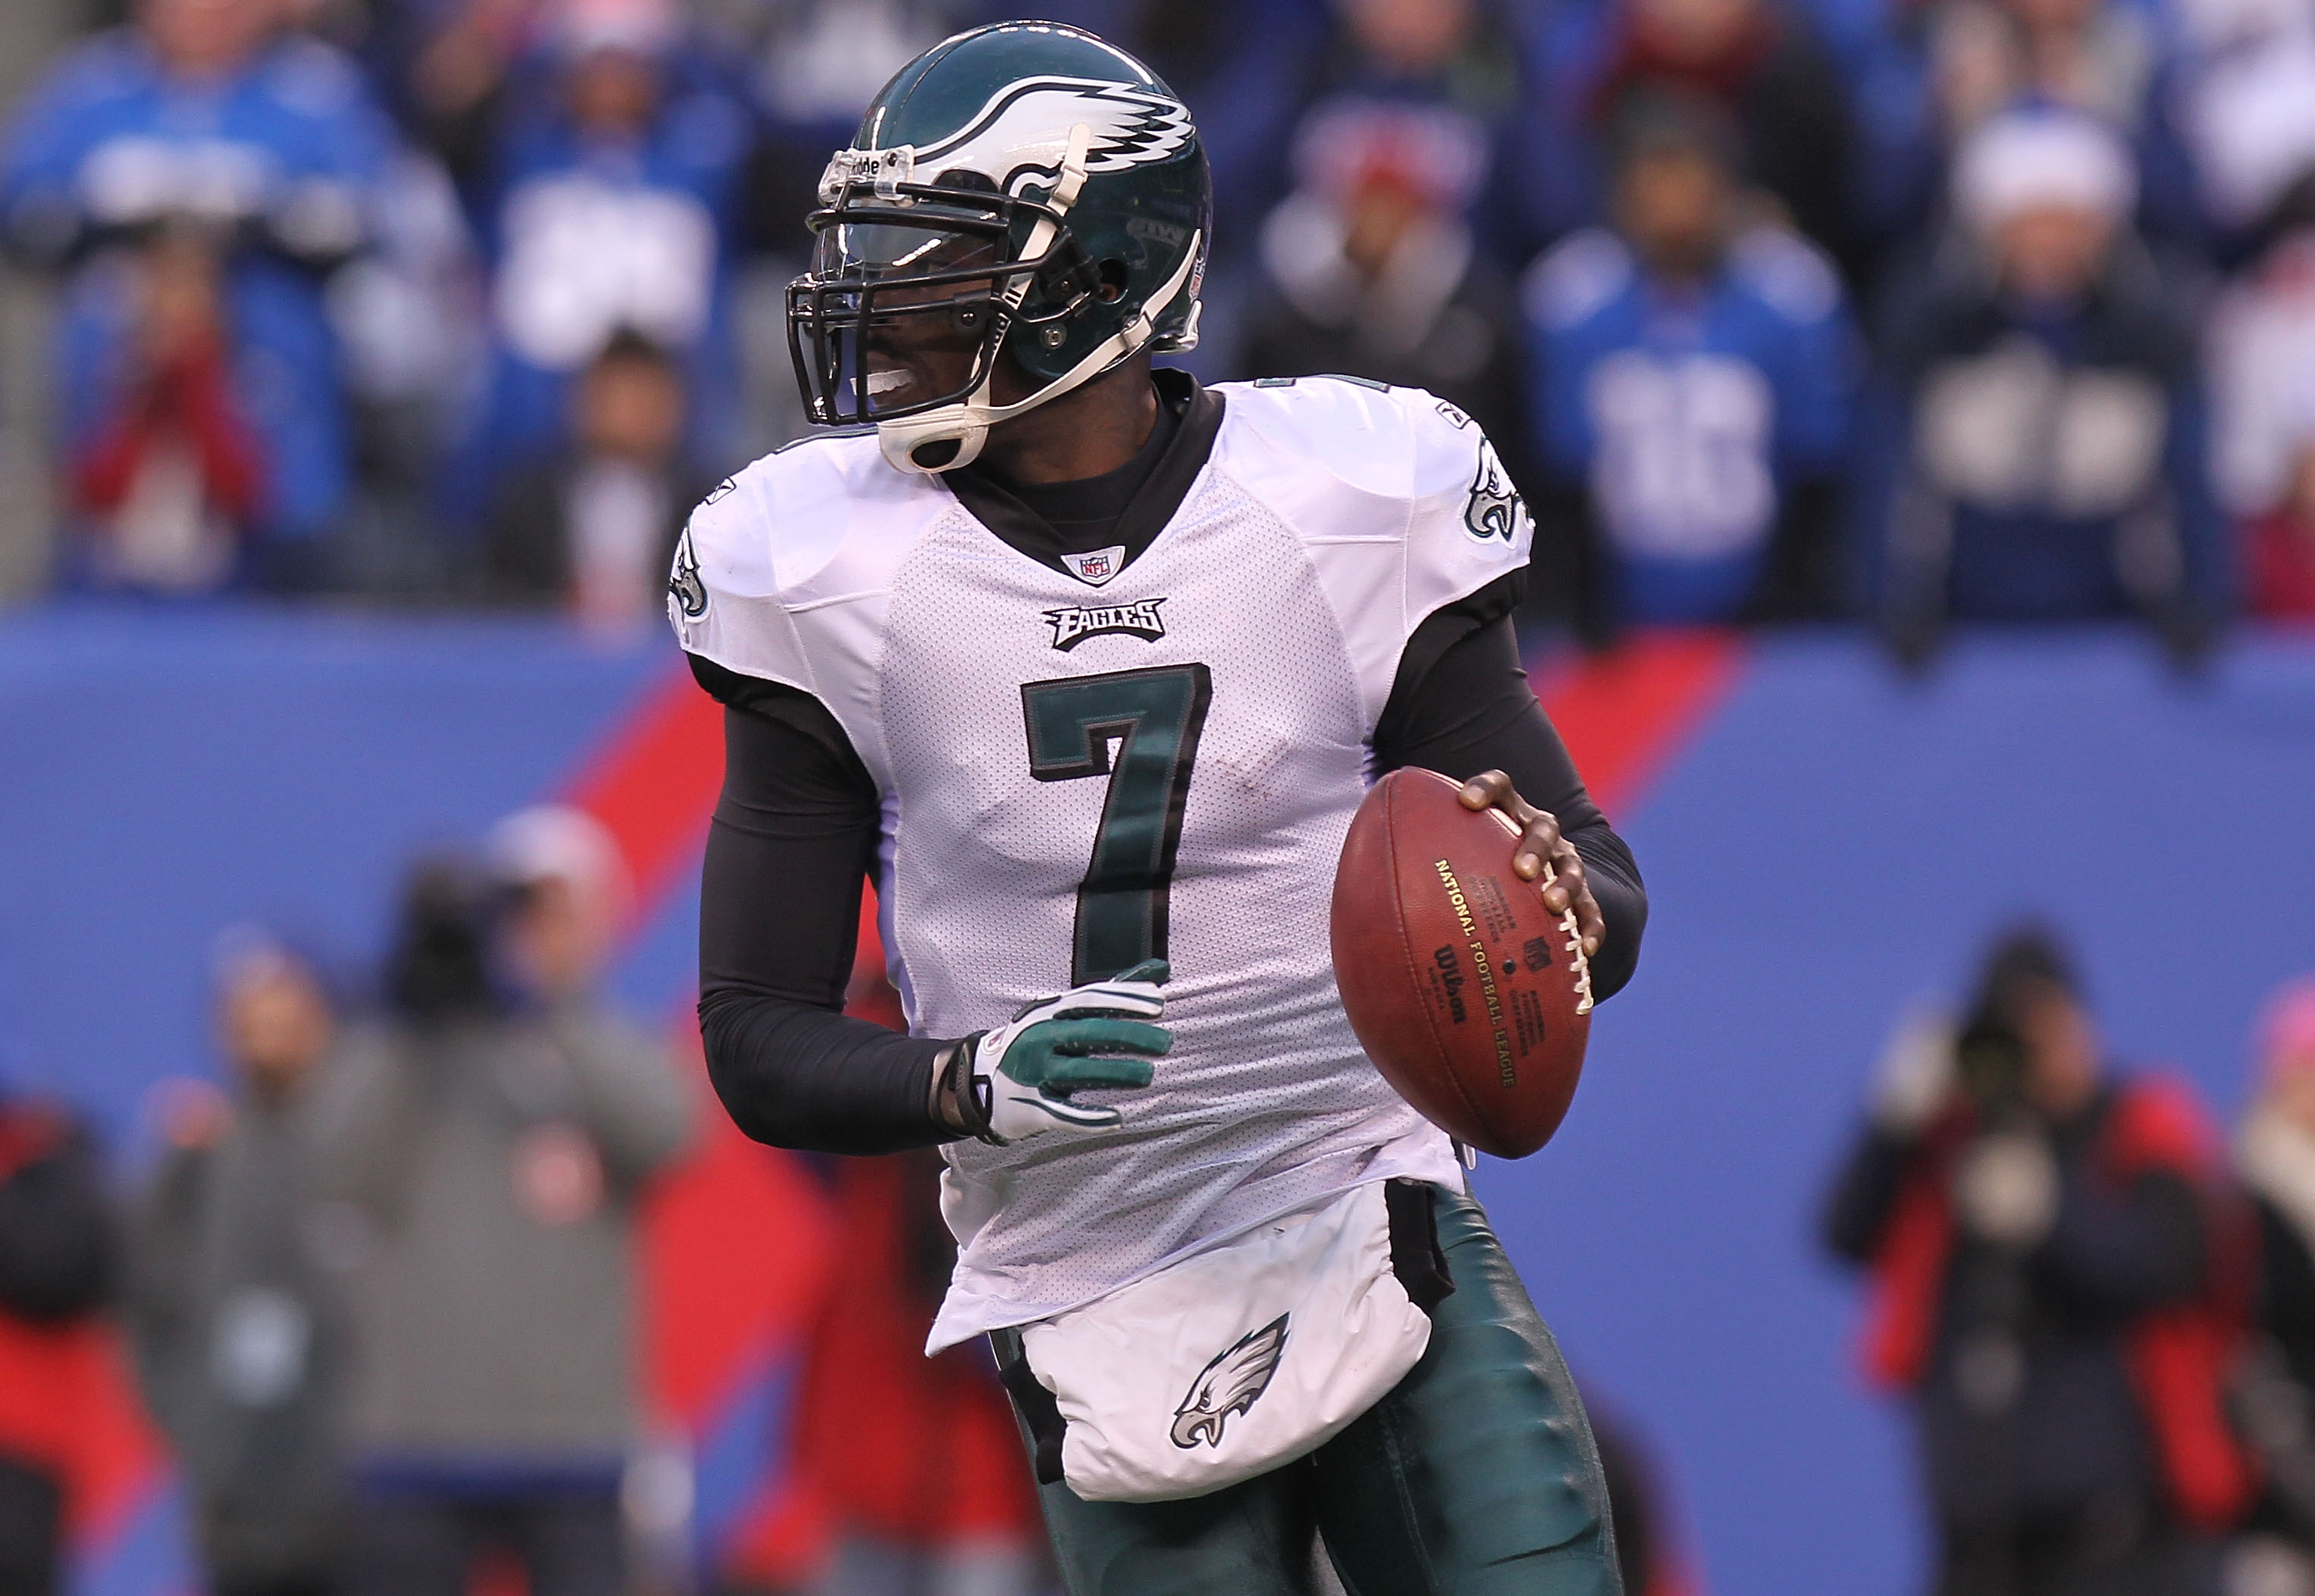 EAST RUTHERFORD, NJ - DECEMBER 19:  Michael Vick #7 of the Philadelphia Eagles passes against the New York Giants at New Meadowlands Stadium on December 19, 2010 in East Rutherford, New Jersey.  (Photo by Nick Laham/Getty Images)